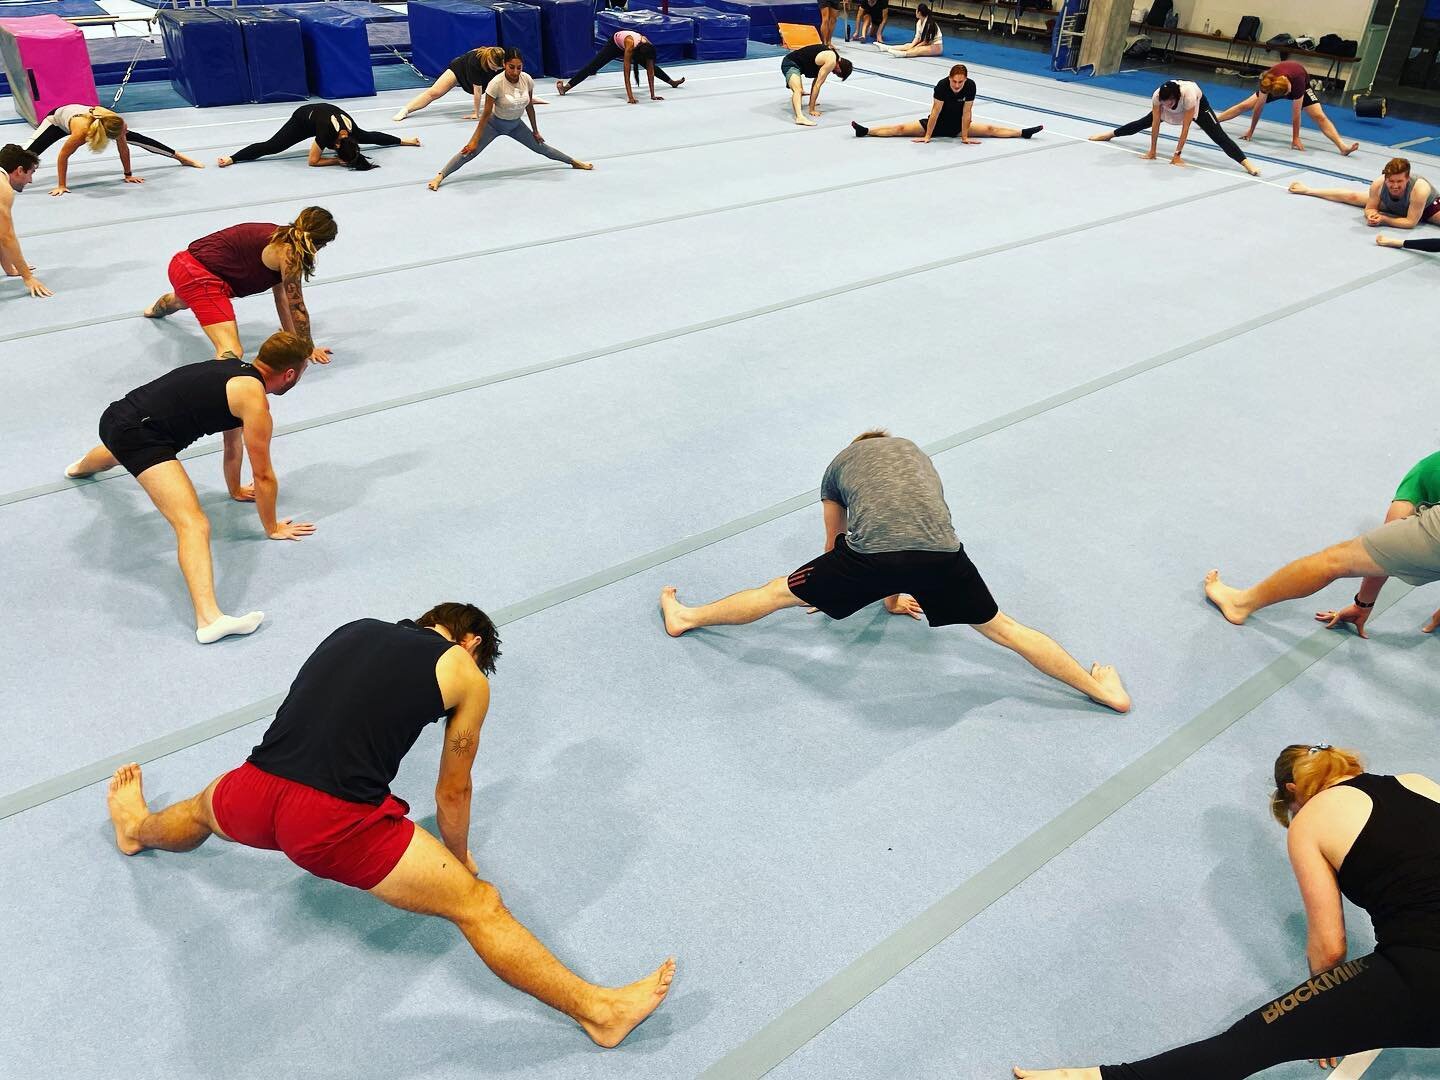 How low can you go ... 🎶🎶

@jackriek on the lowdown of what hard work and consistency can achieve ⬇️🤸

All levels welcome and celebrated! 👏👏👏

#urbangymnastics #adultgymnastics #tumbling #strengthandconditioning